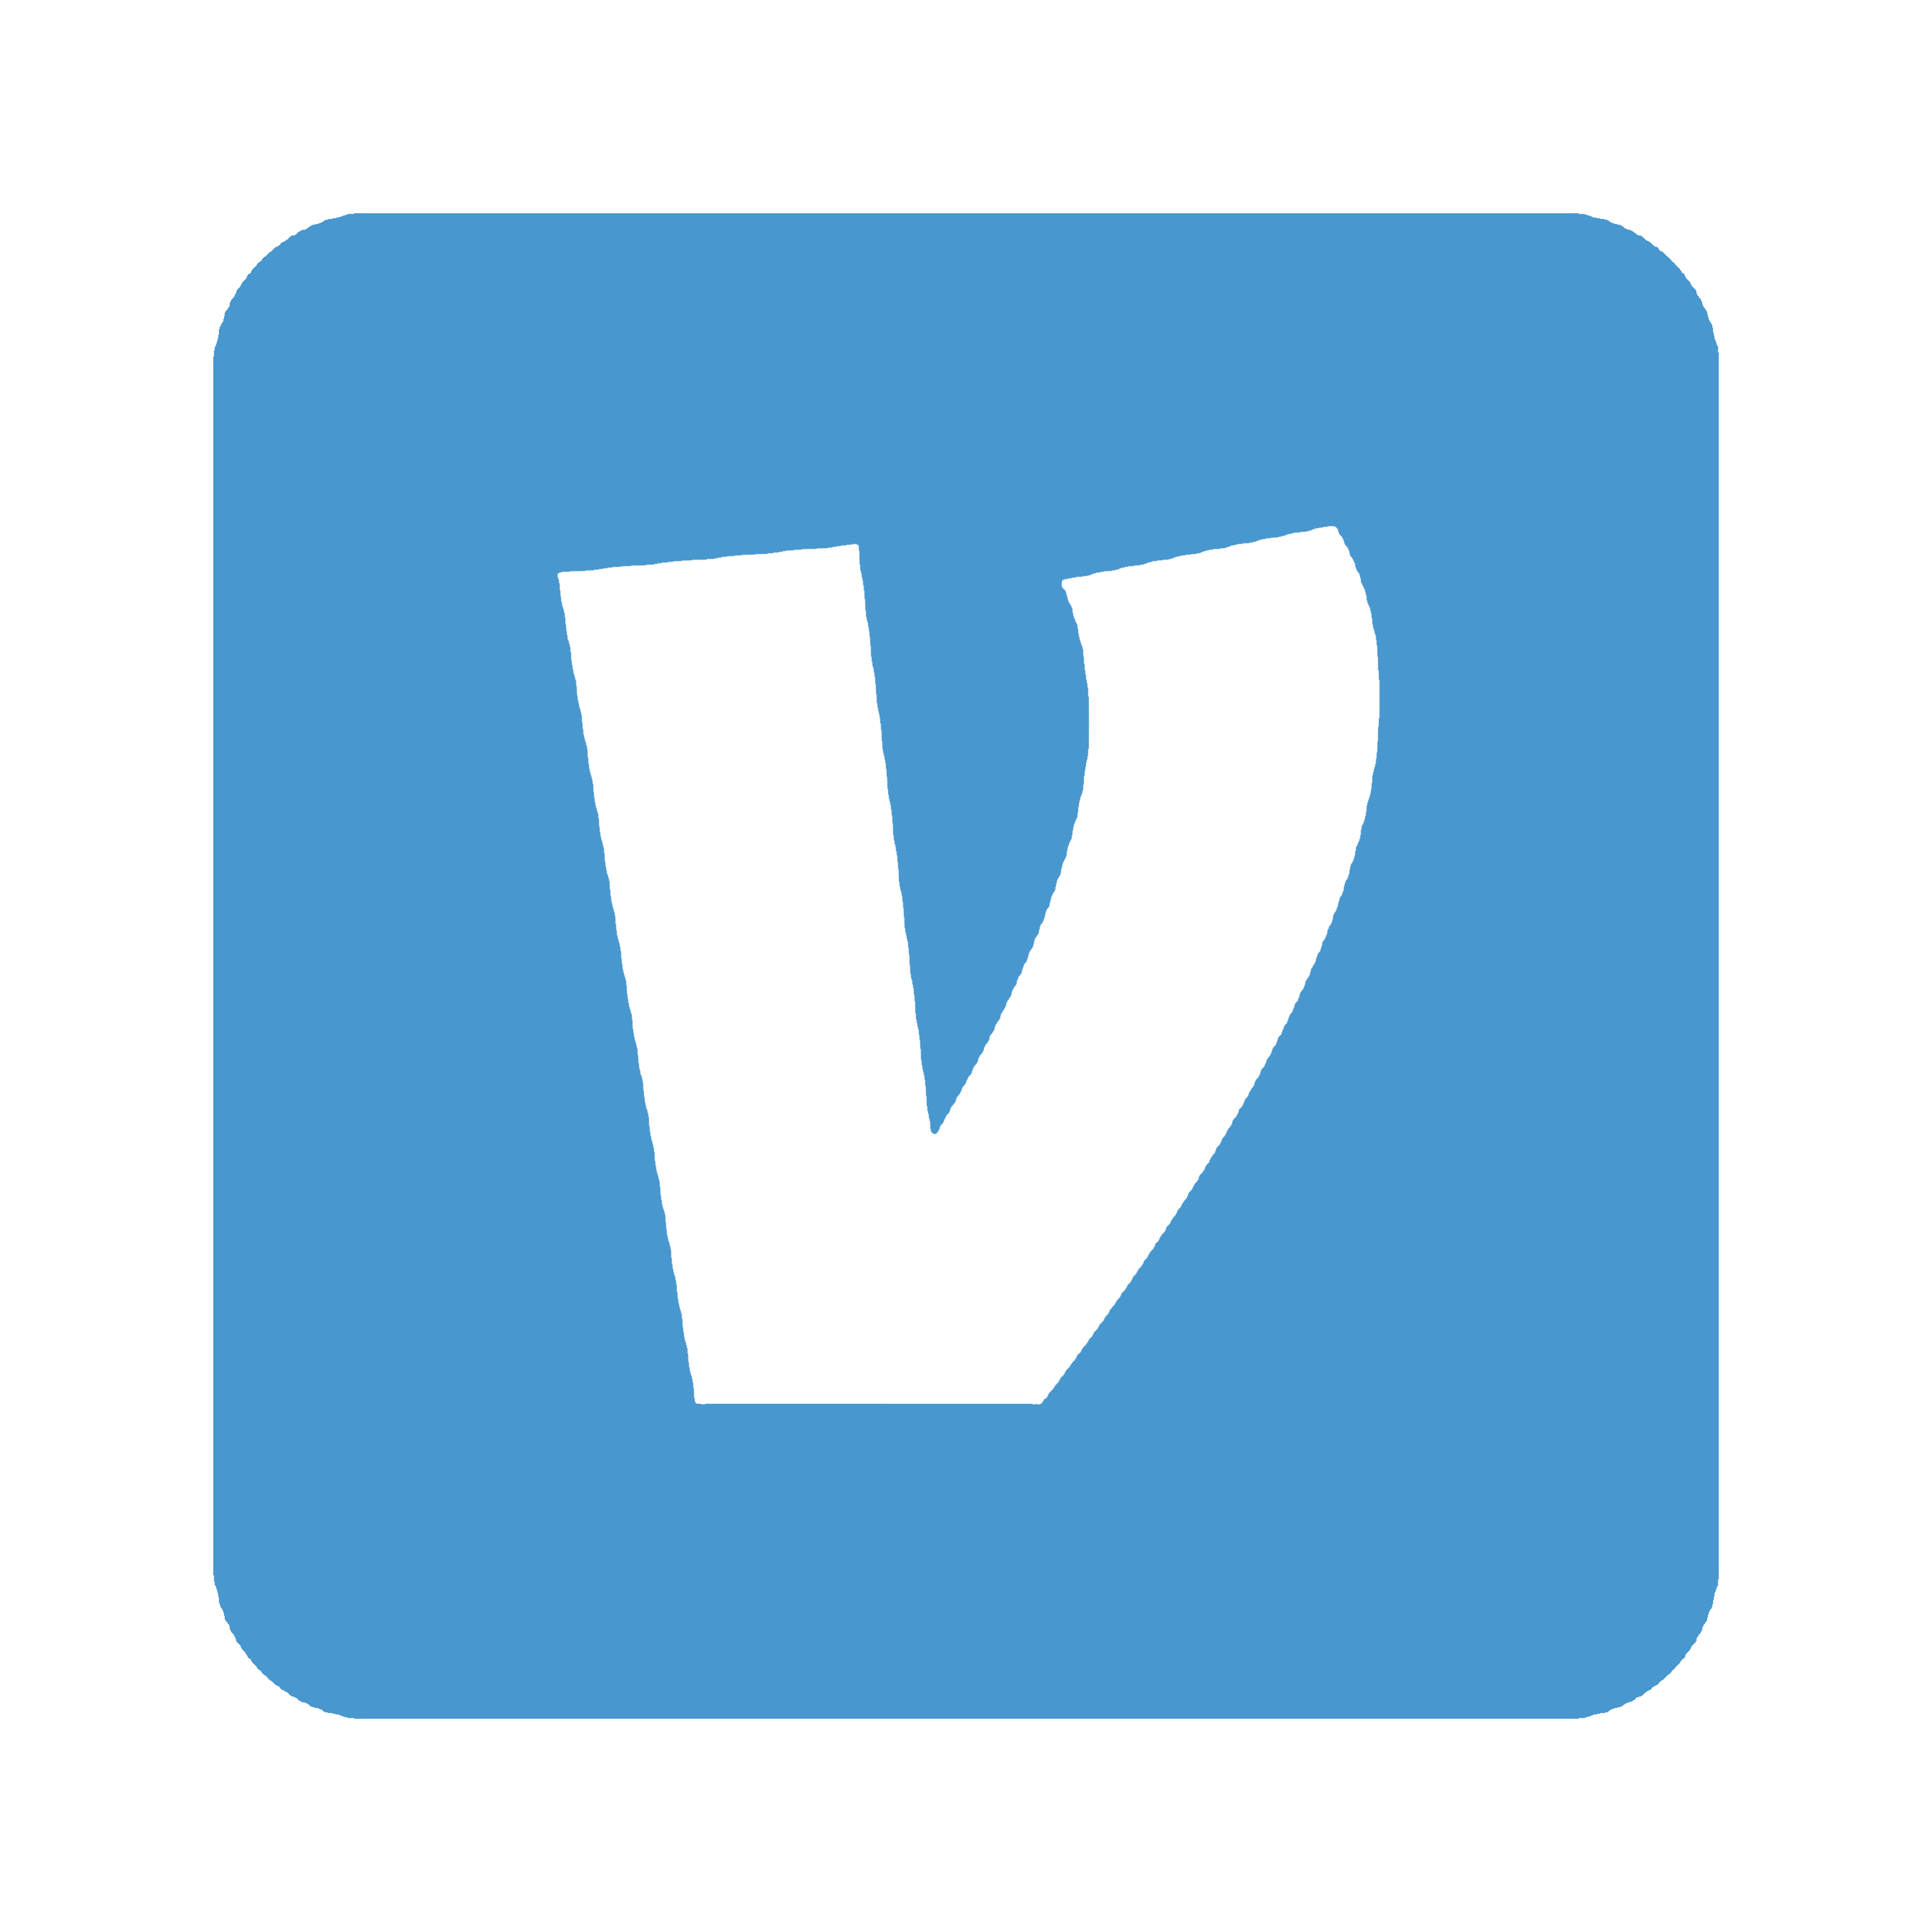 the Venmo logo, which is a V in a rounded square